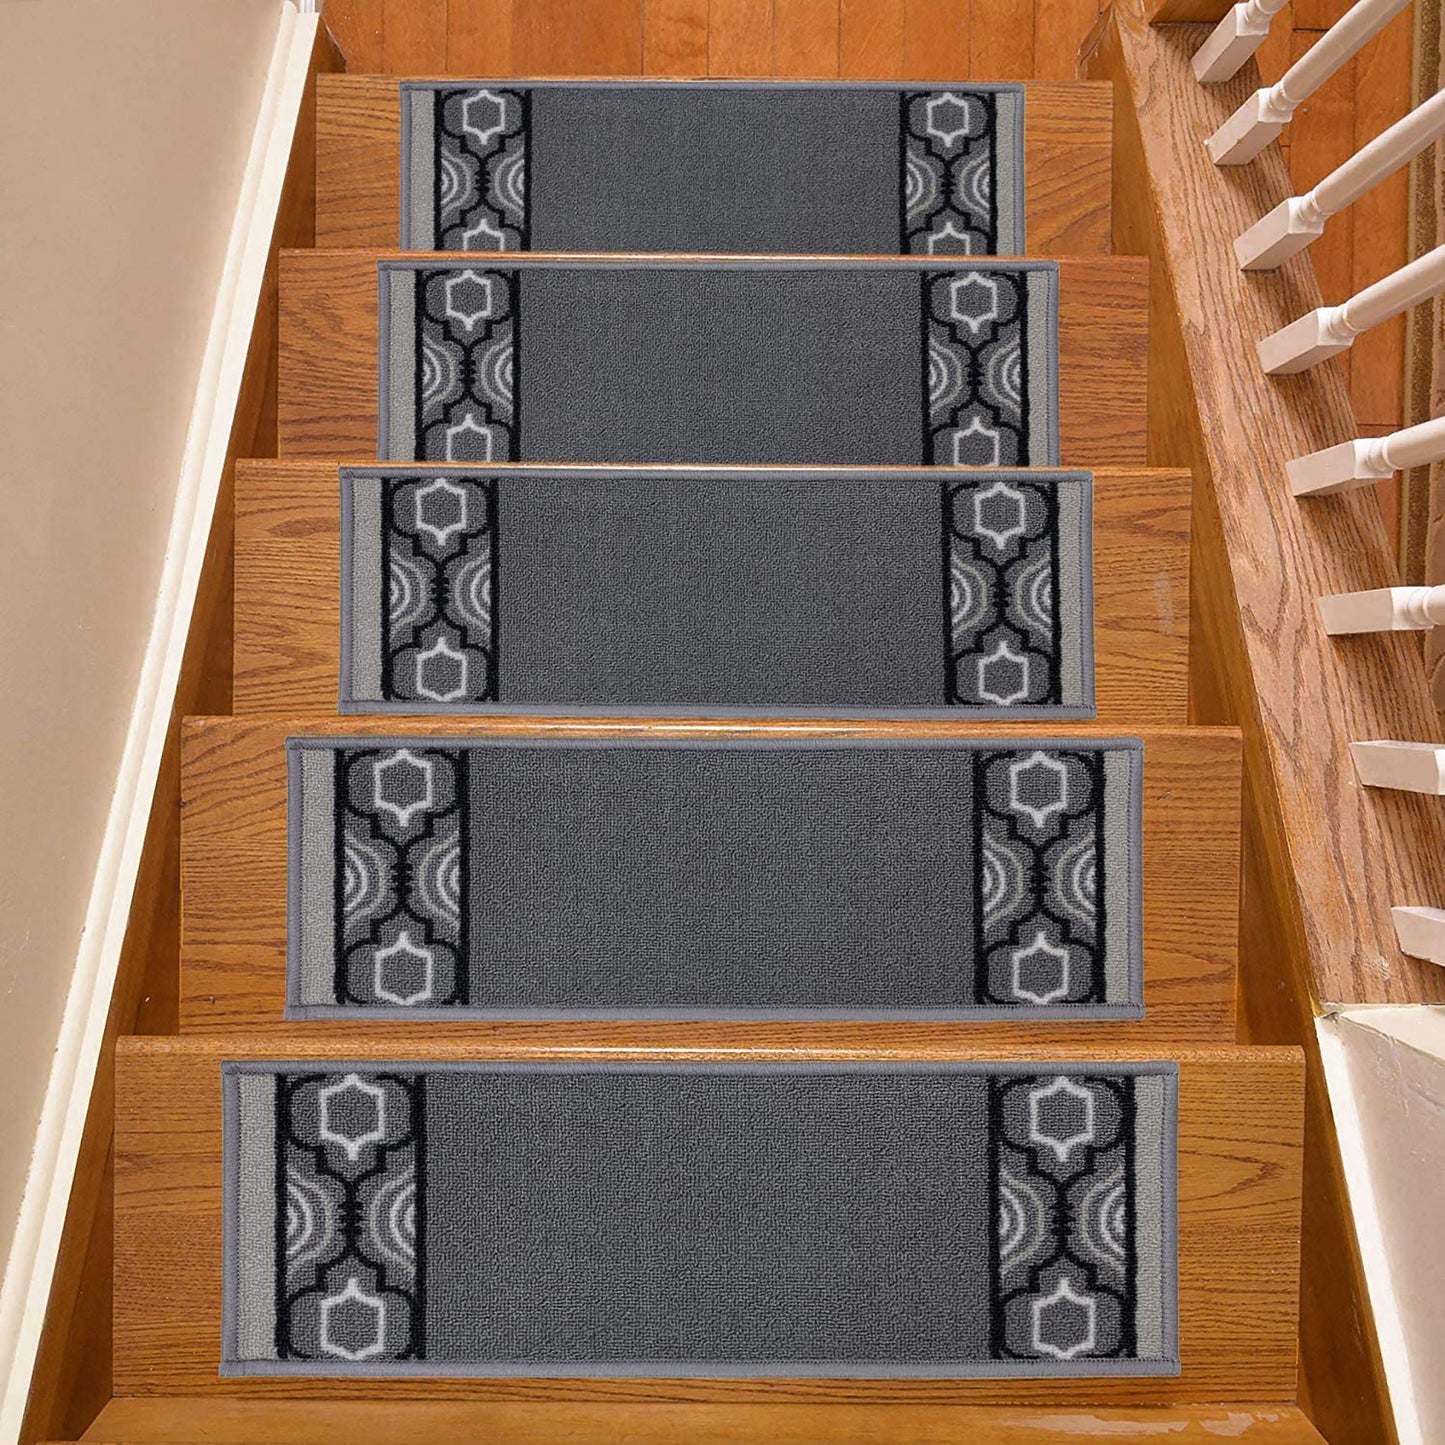 Machine Washable Stair Tread Moroccan Trellis Border Grey Skid Resistant Latex Carpet Stair Treads Size 8.5" x 26" and 9" x 36" Set Options